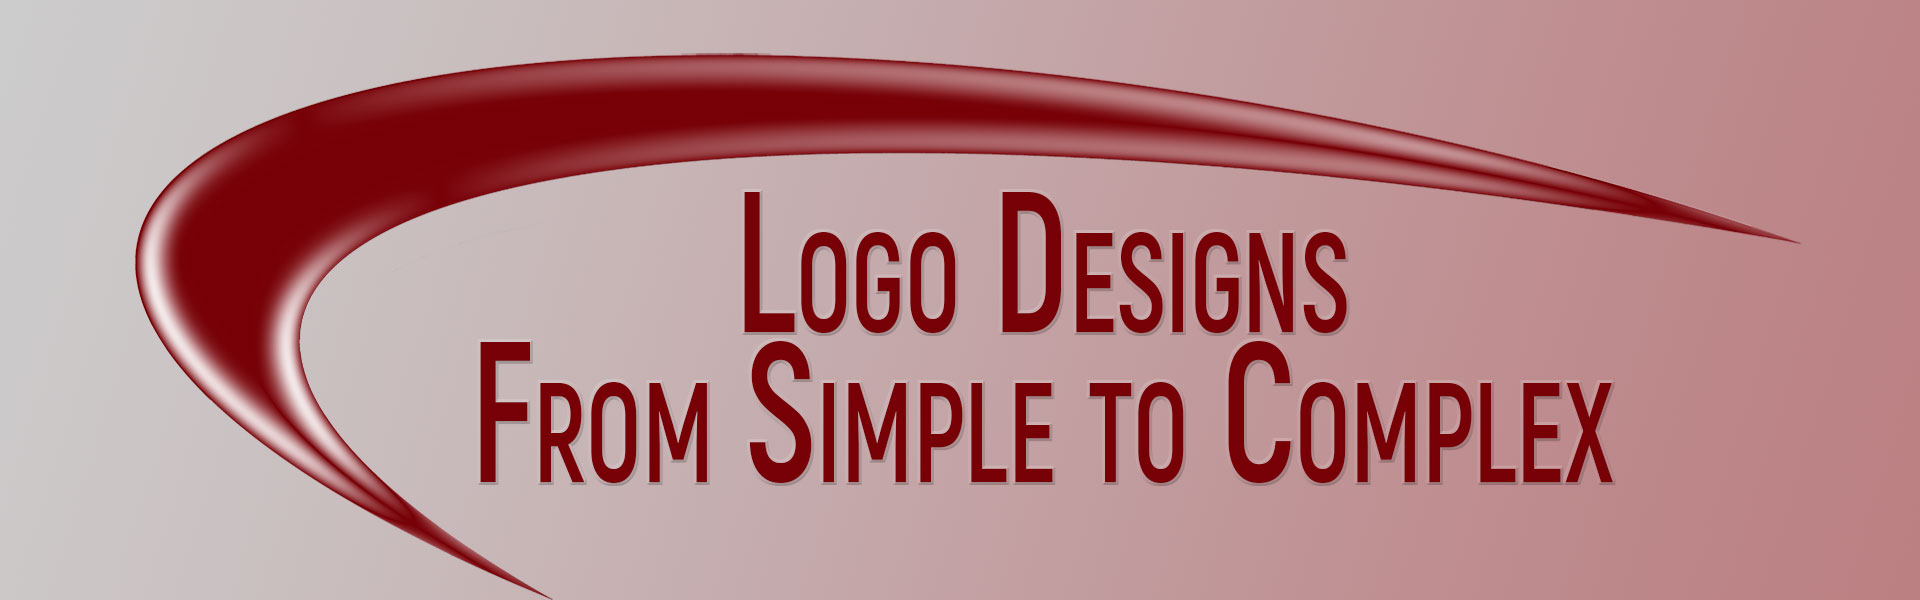 As part of our one-stop-shop service, Affordable Web Design Ltd offers logo designs to suit your budget.